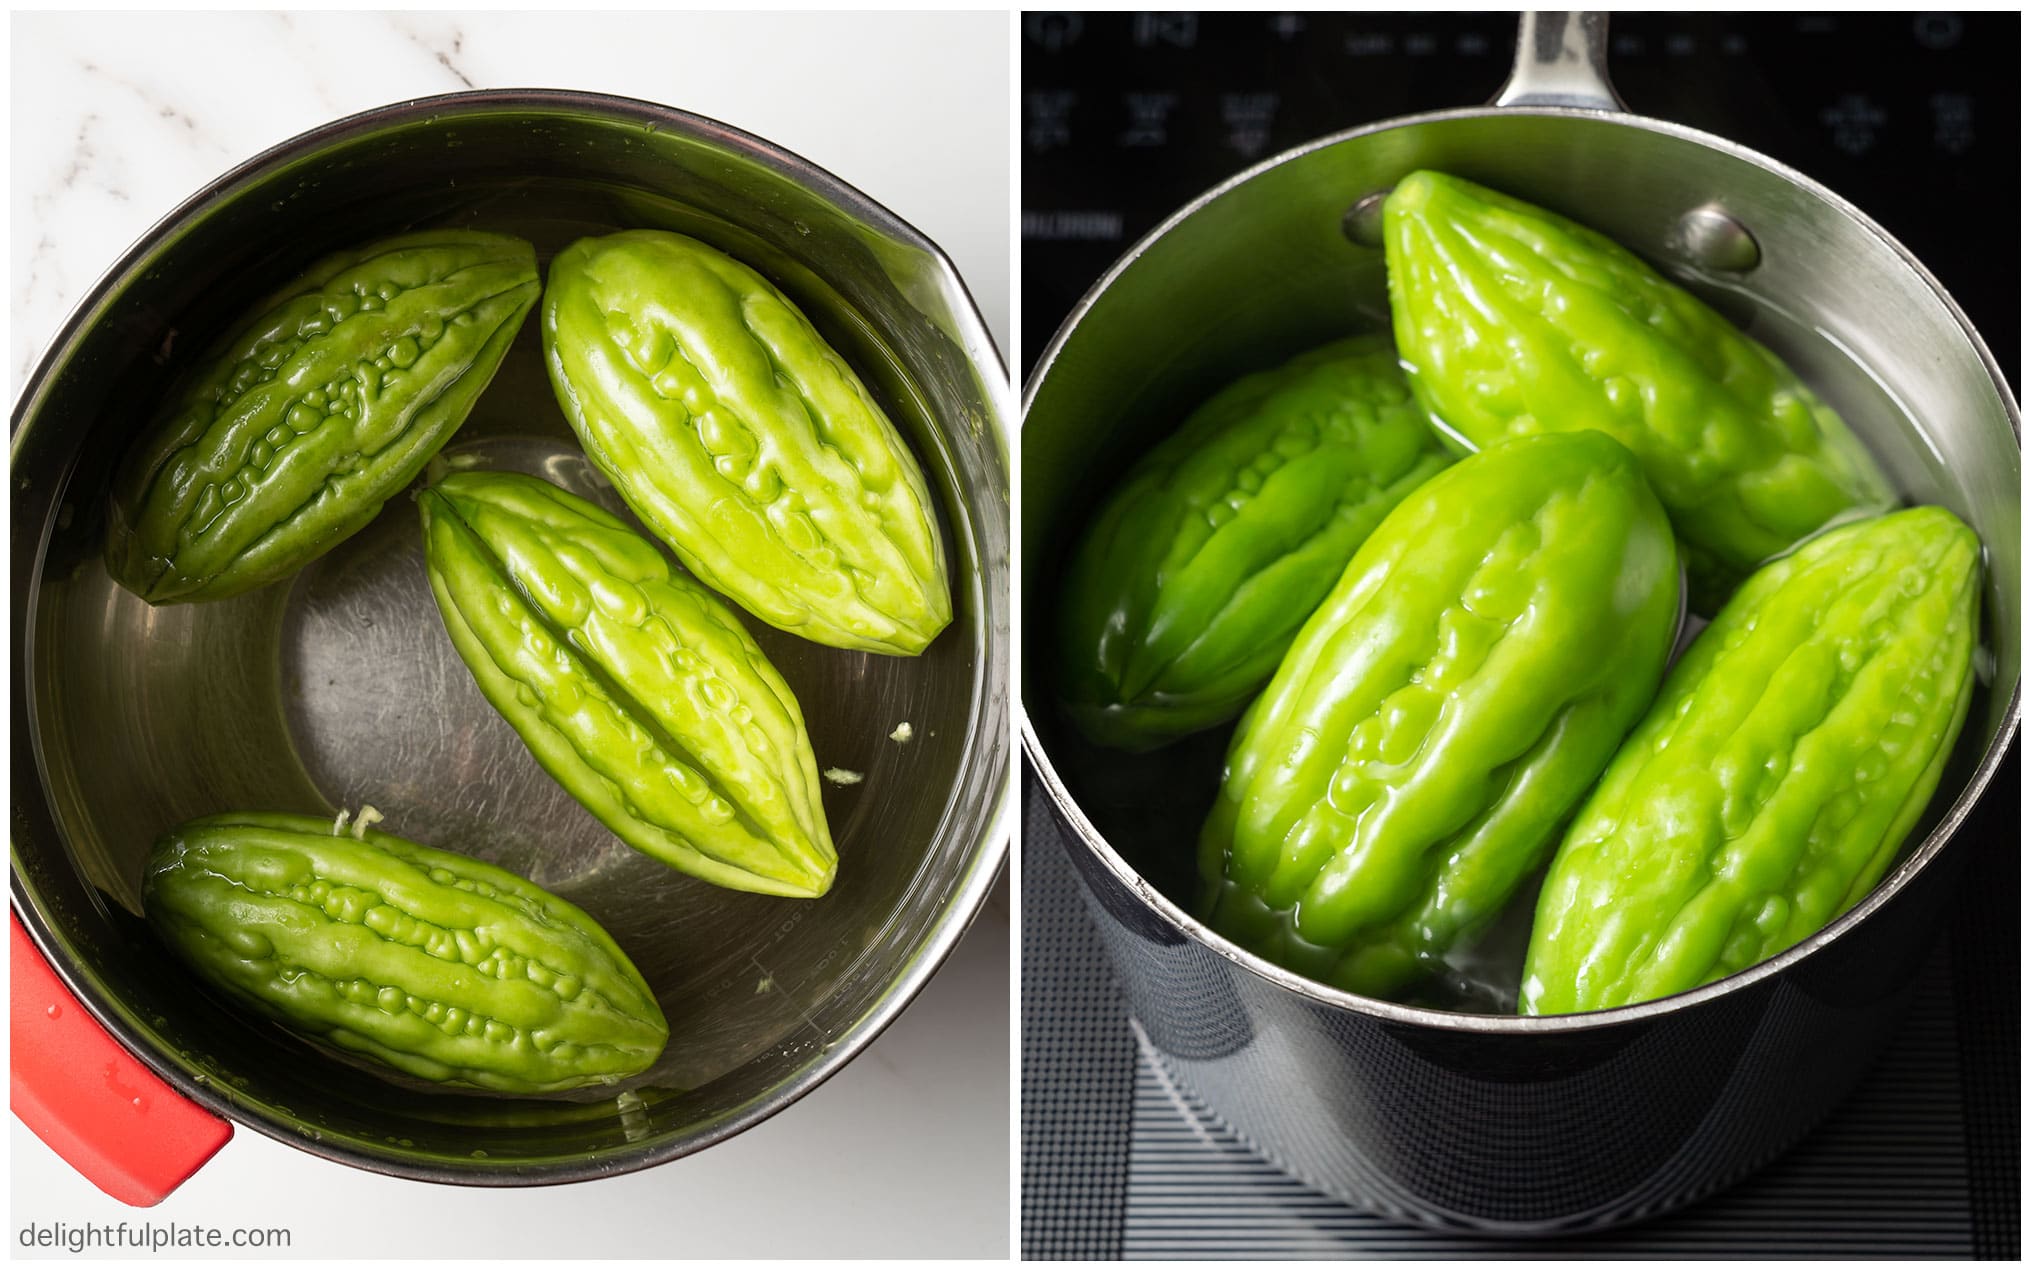 a collage of two ways to make the gourd less bitter: soaking in salted water and blanching